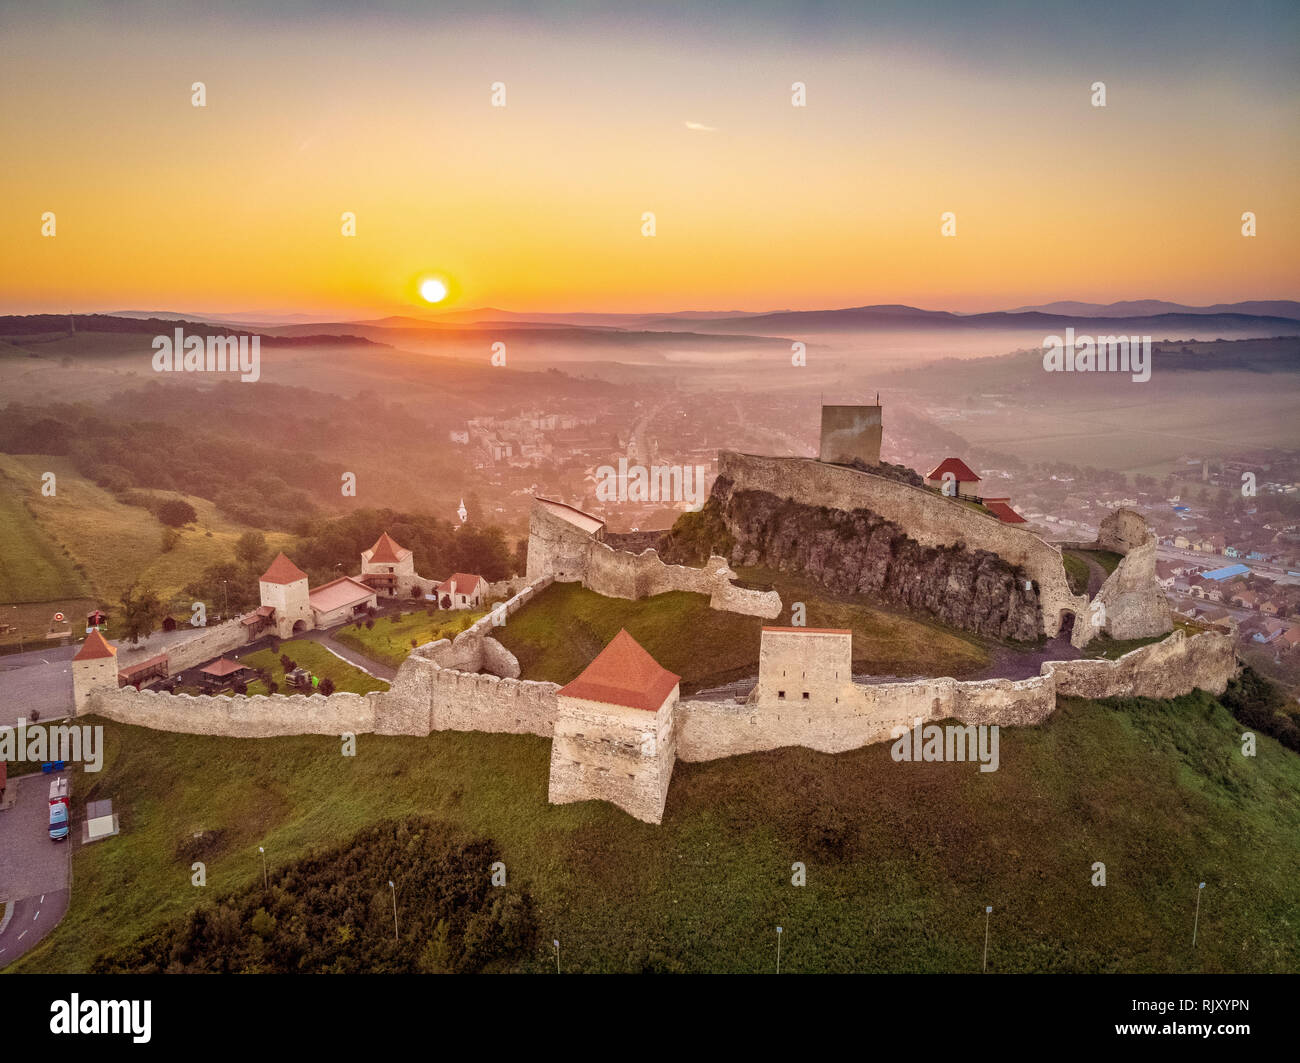 Sunrise in Romania landscape at the Rupea Fortress in Transylvania between Brasov and Sighisoara Stock Photo